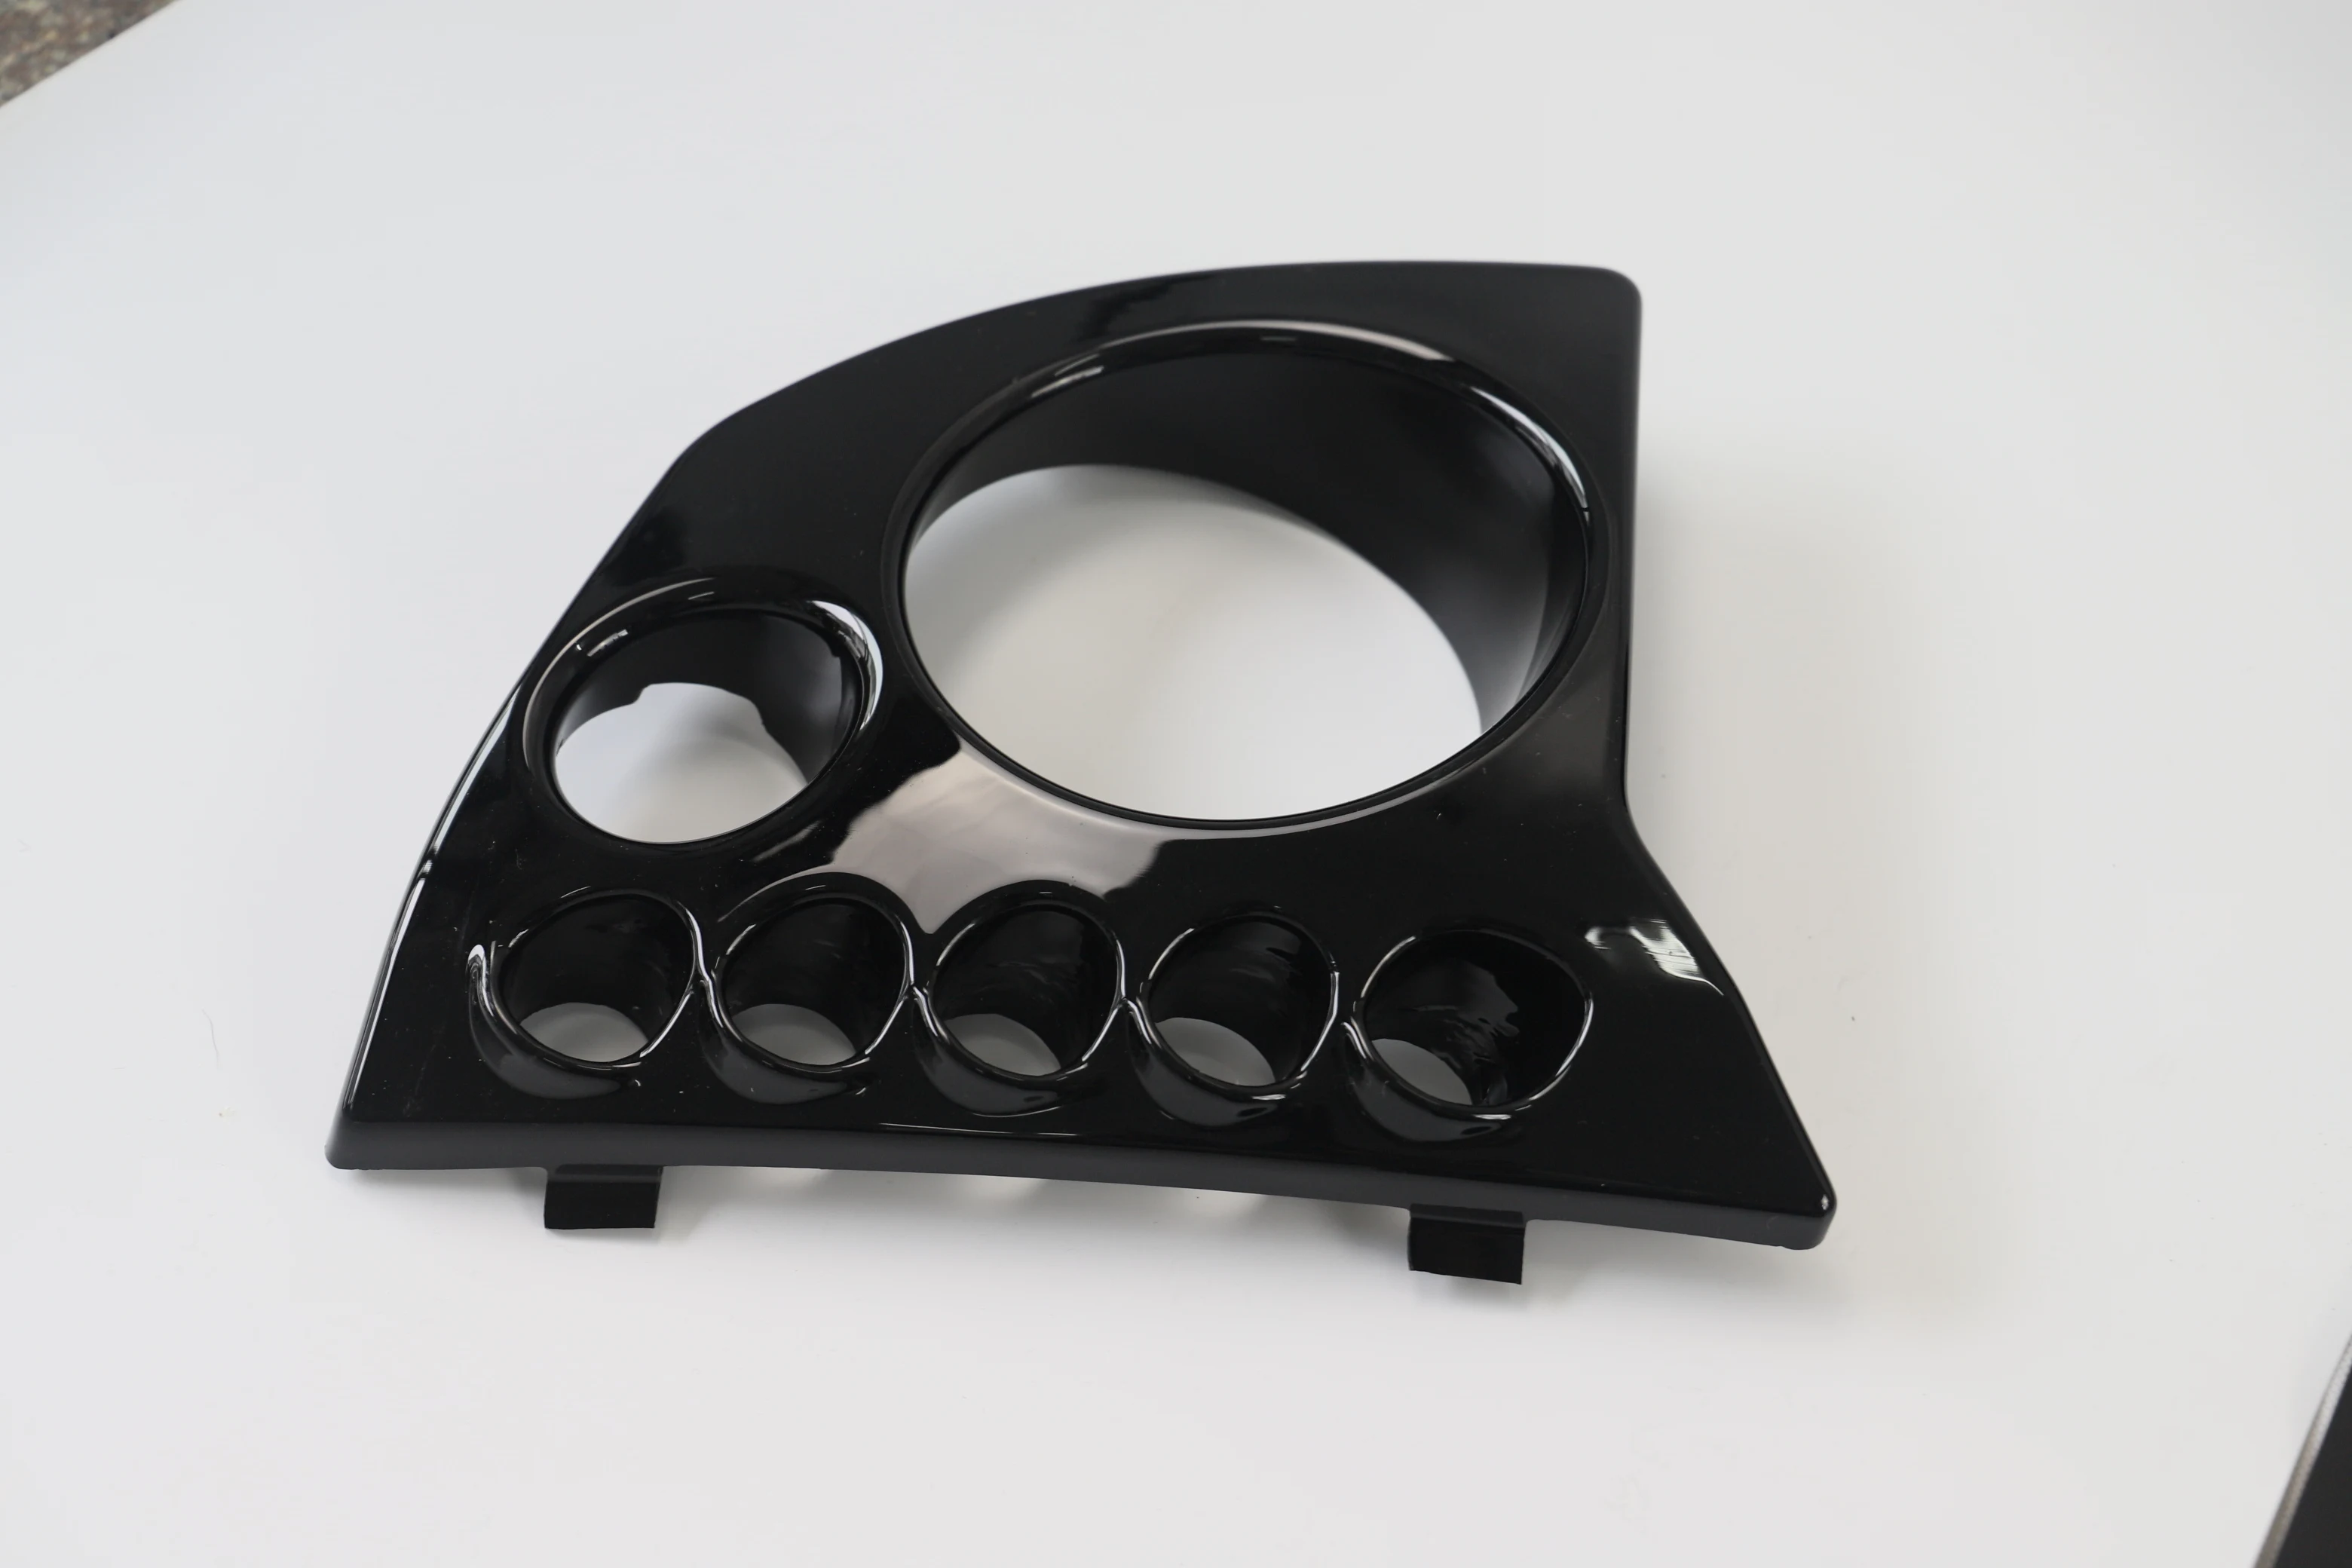 Professional Custom Parts Manufacturer And Auto Vacuum Forming Suppliereeeee - Buy Car Parts Accessories Auto,Vacuum Forming,Car Parts Product on Alibaba.com